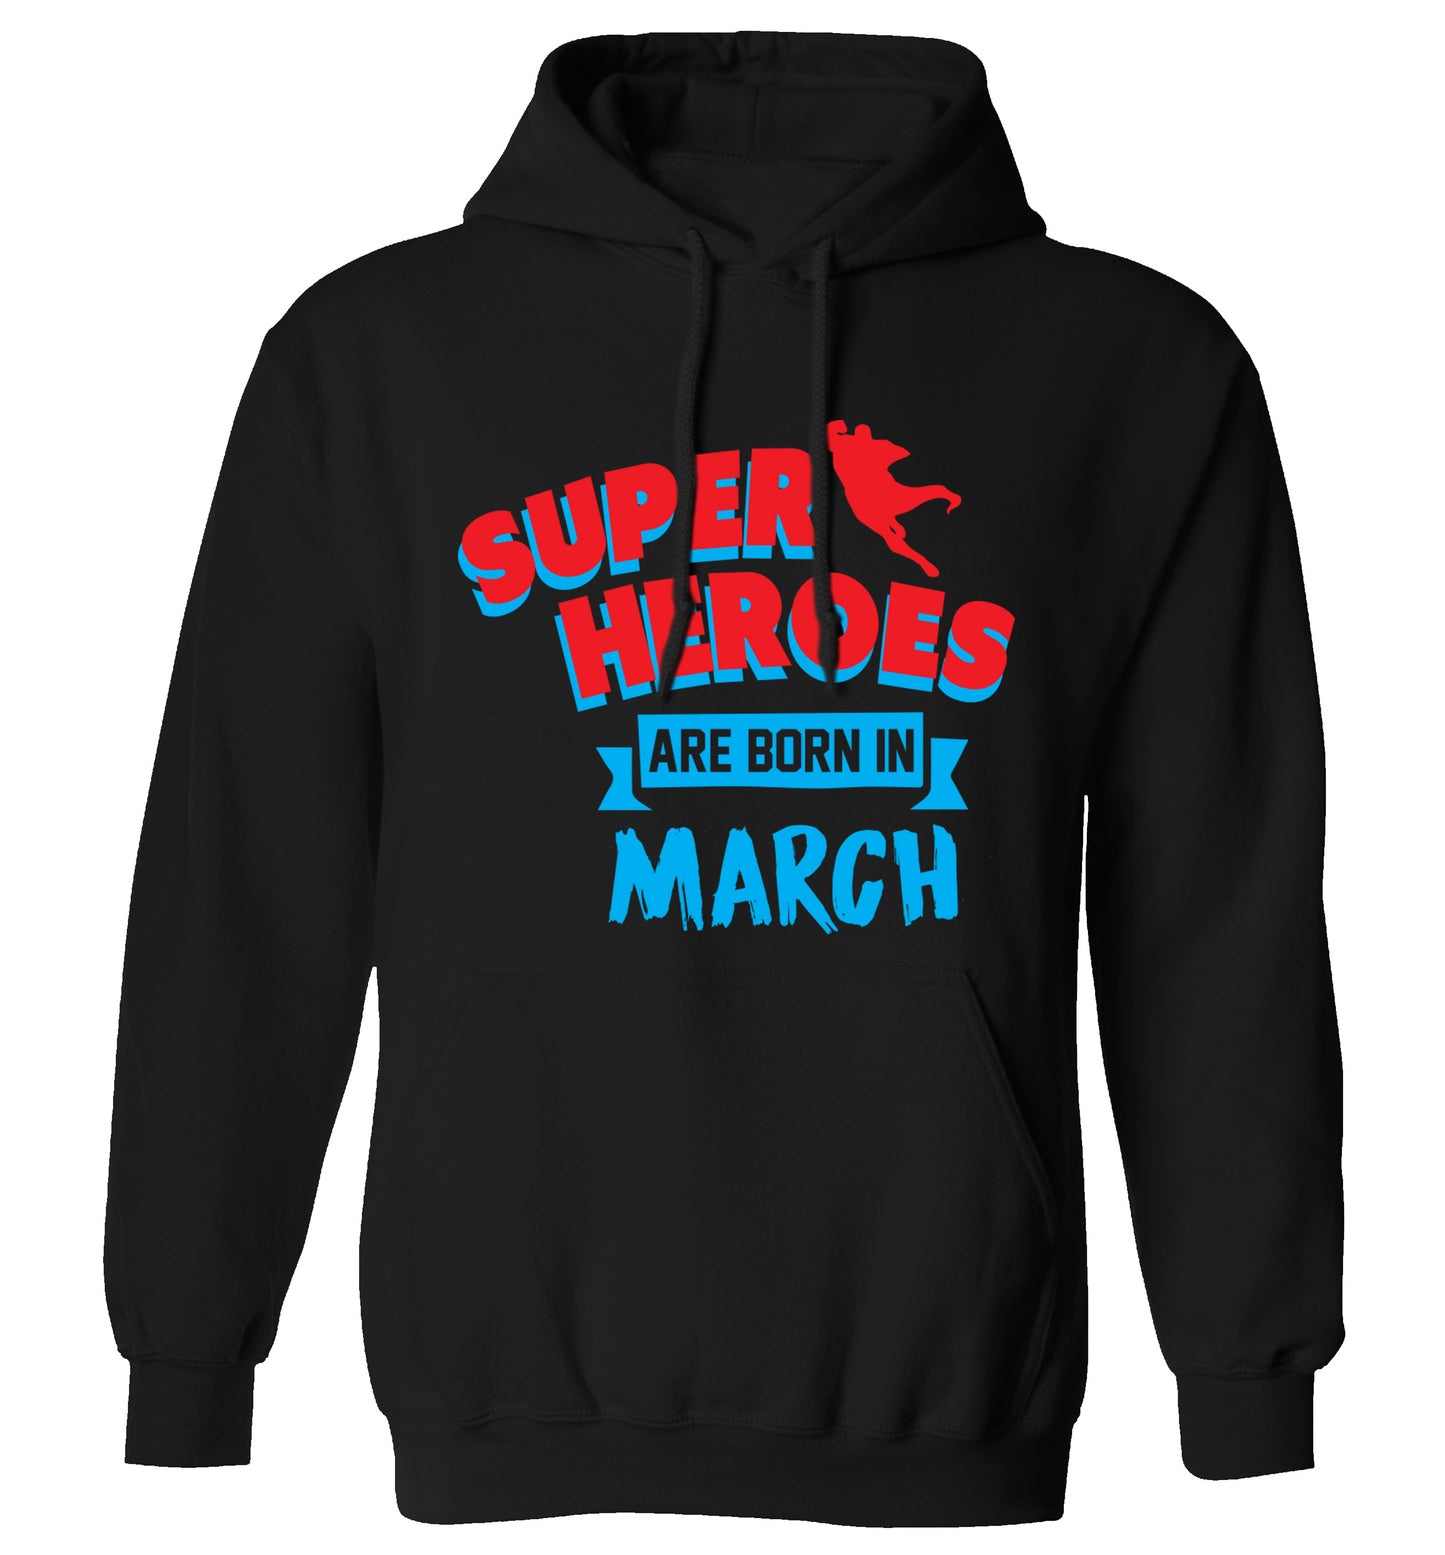 Superheros are born in March adults unisex black hoodie 2XL